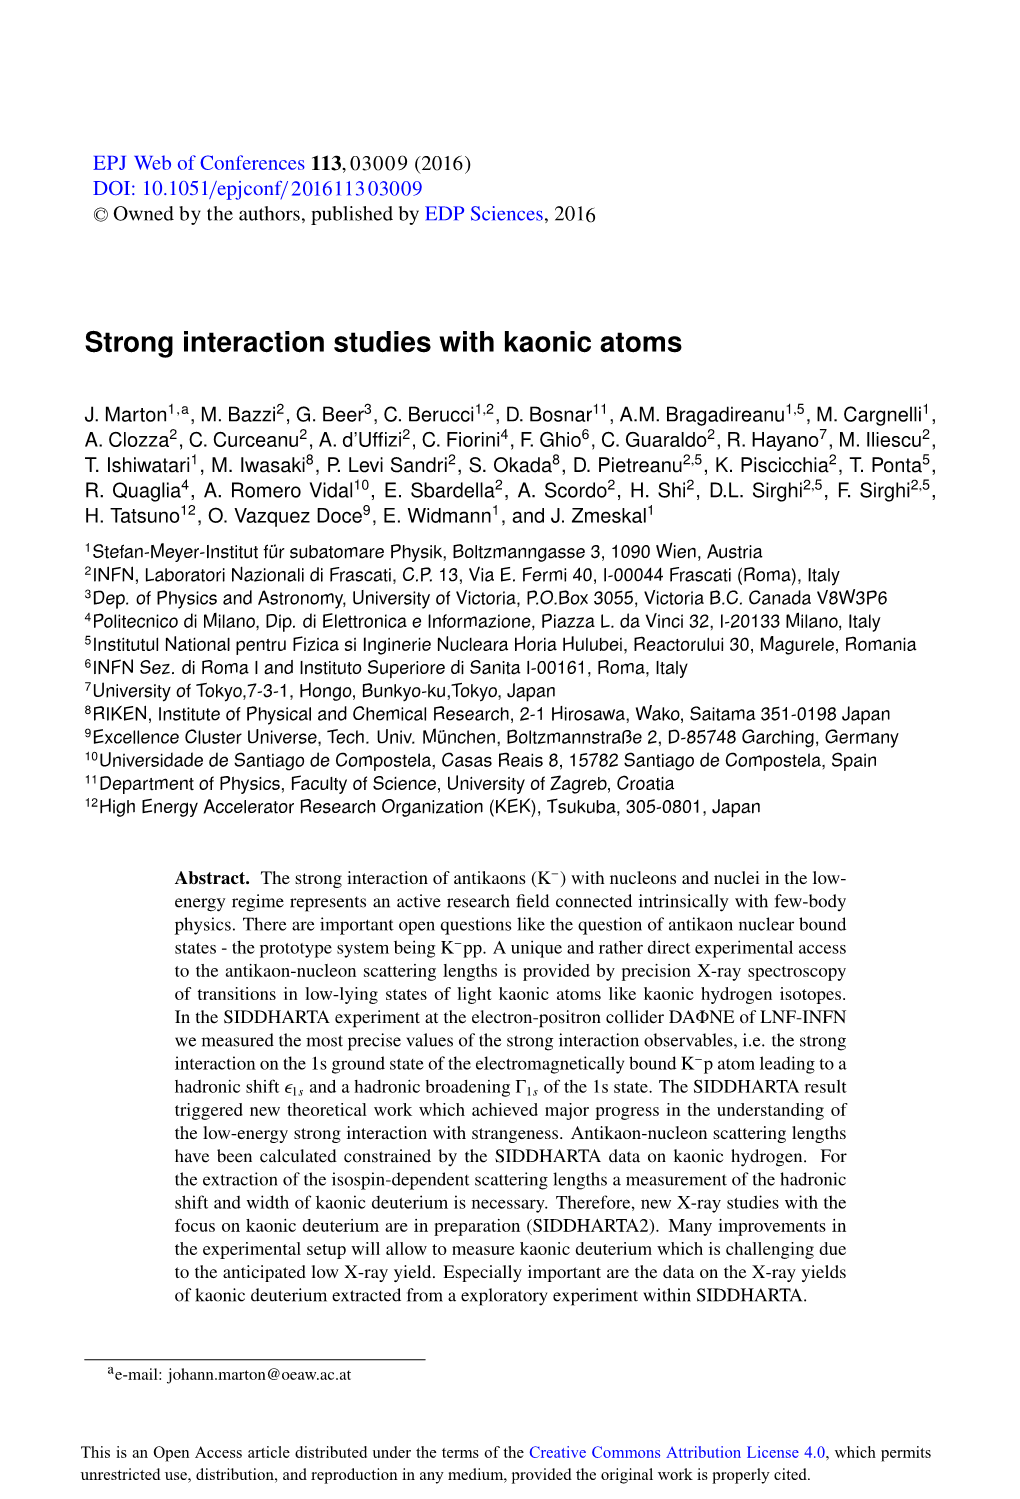 Strong Interaction Studies with Kaonic Atoms